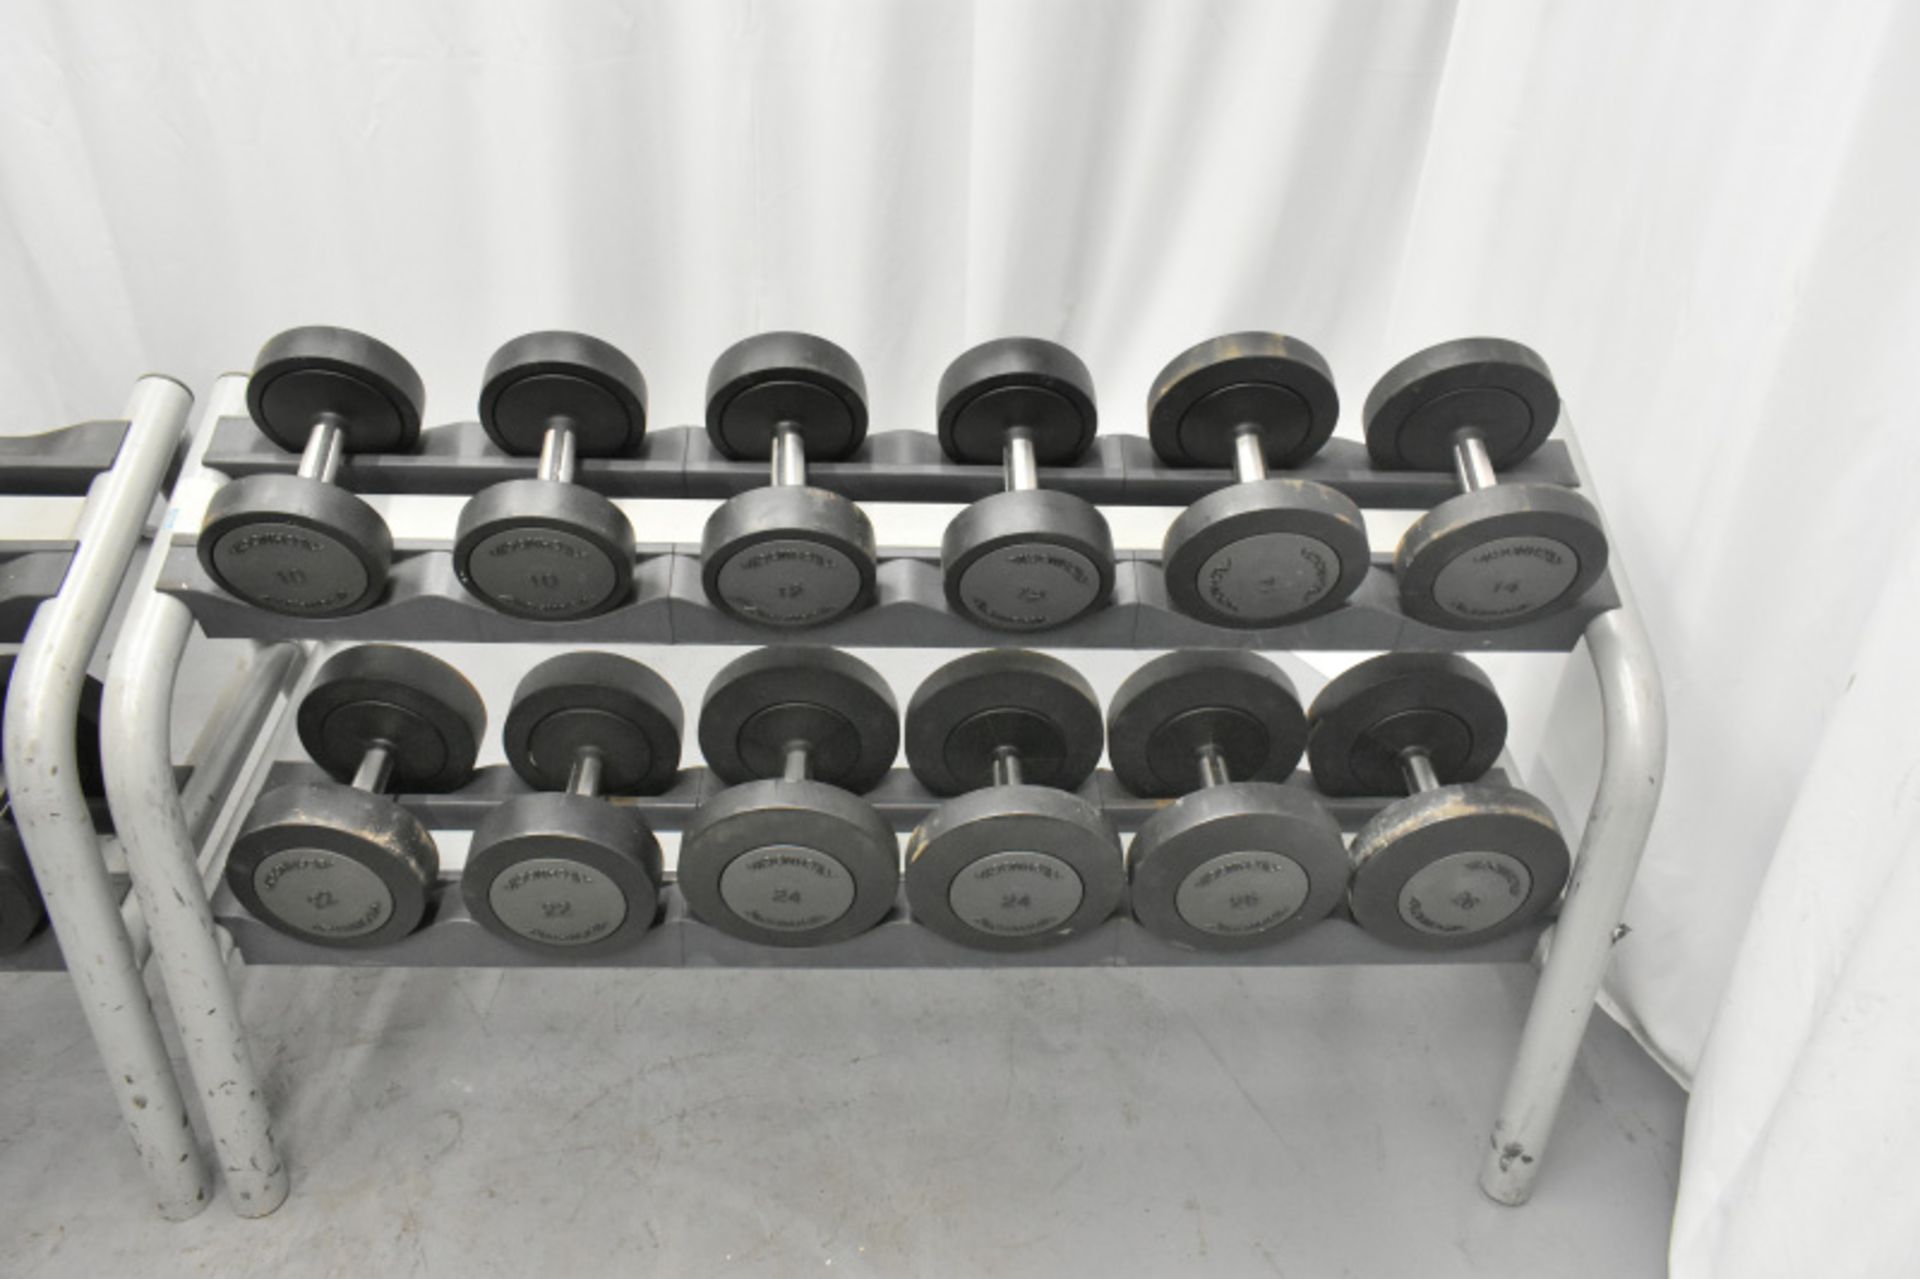 Dumbell weights 4kg - 26kg & Rack - Please check pictures for overall condition - Image 5 of 6